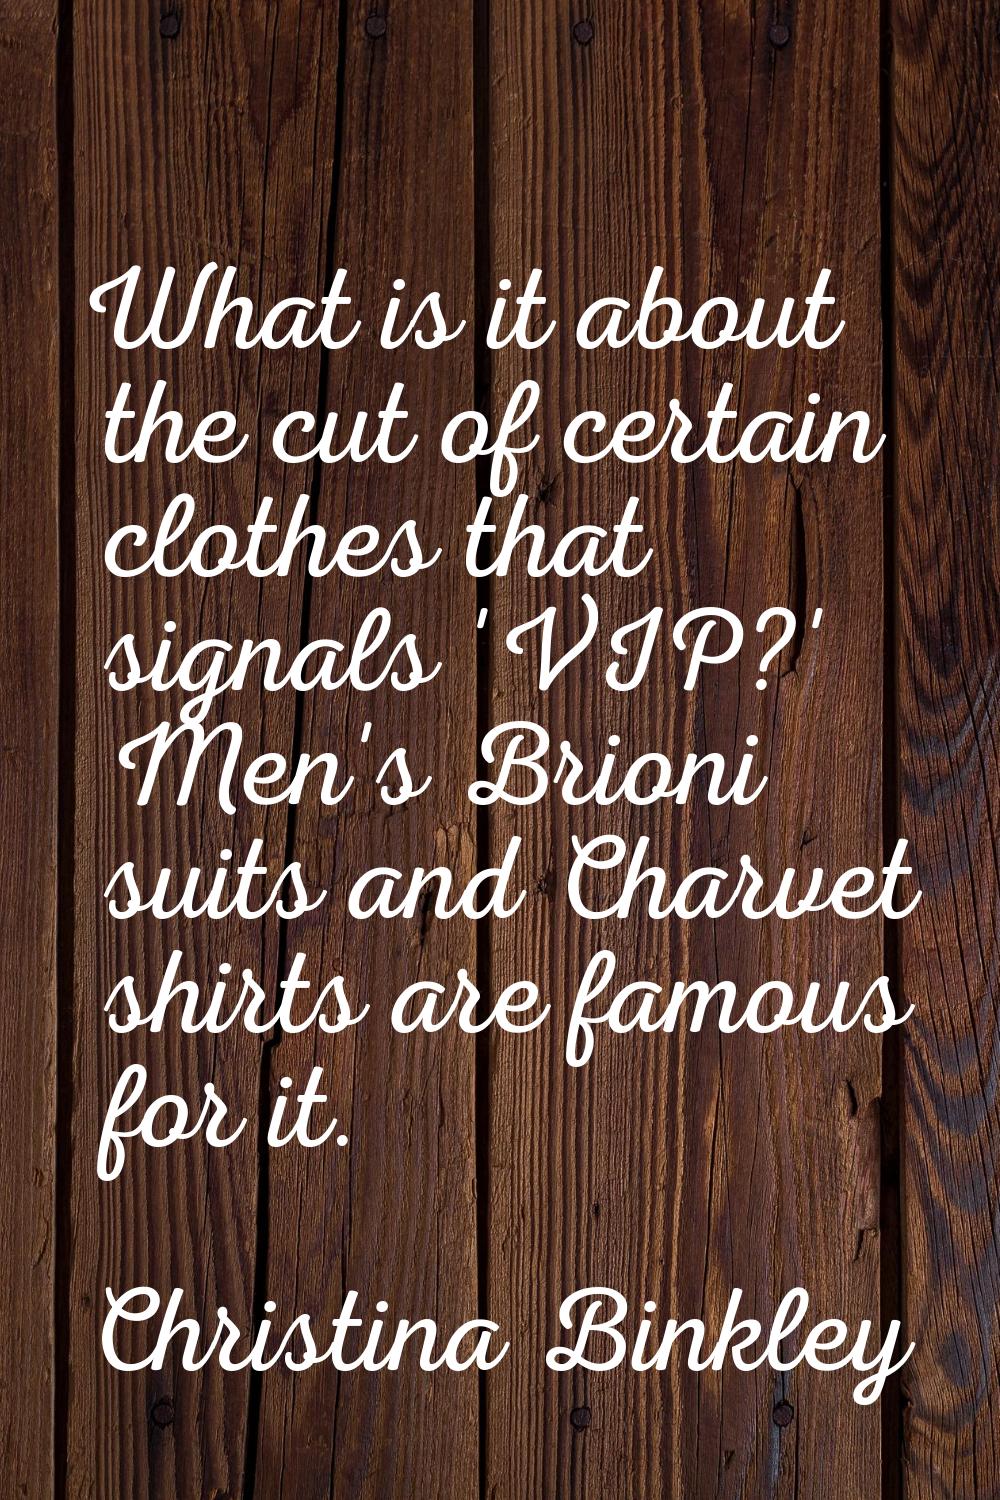 What is it about the cut of certain clothes that signals 'VIP?' Men's Brioni suits and Charvet shir